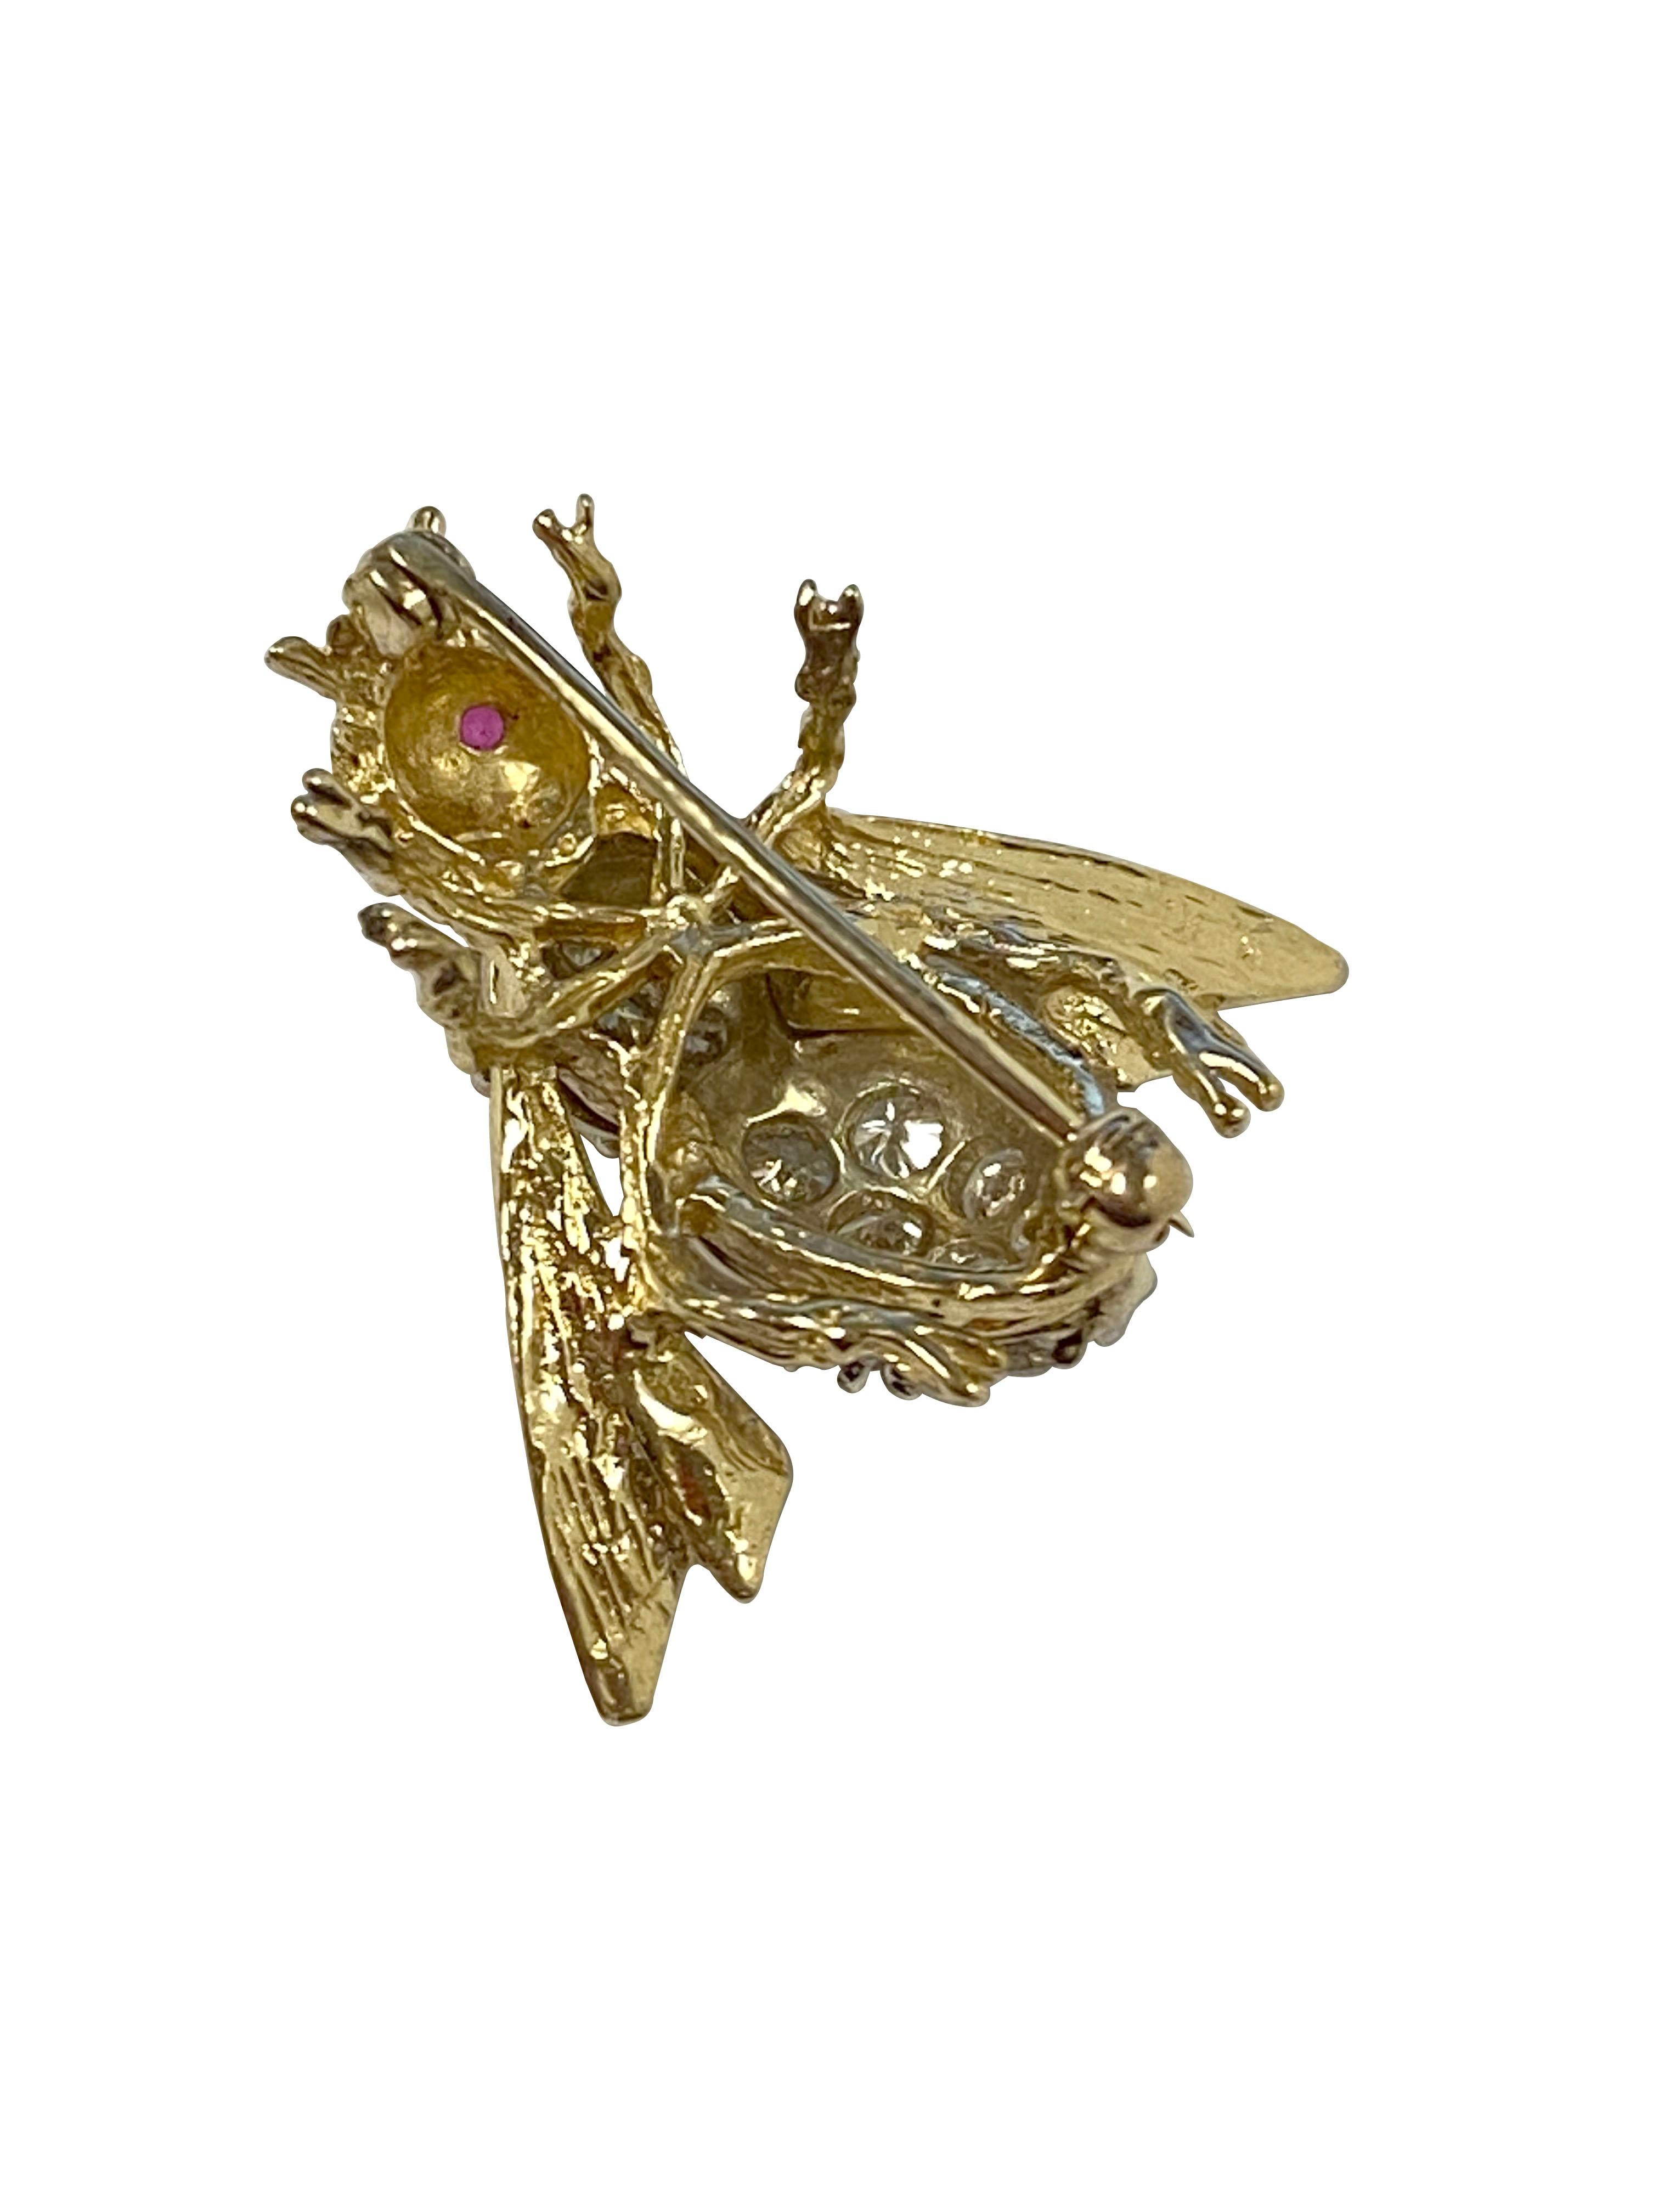 Circa 1980s 14k Yellow Gold Bee Brooch, measuring 1 inch in length and 1 1/8 inch wide, set with Round Brilliant cut Diamonds totaling 1.50 Carats and Grading as G in color and VS in Clarity. Further set with Ruby eyes, hand textured and detailed